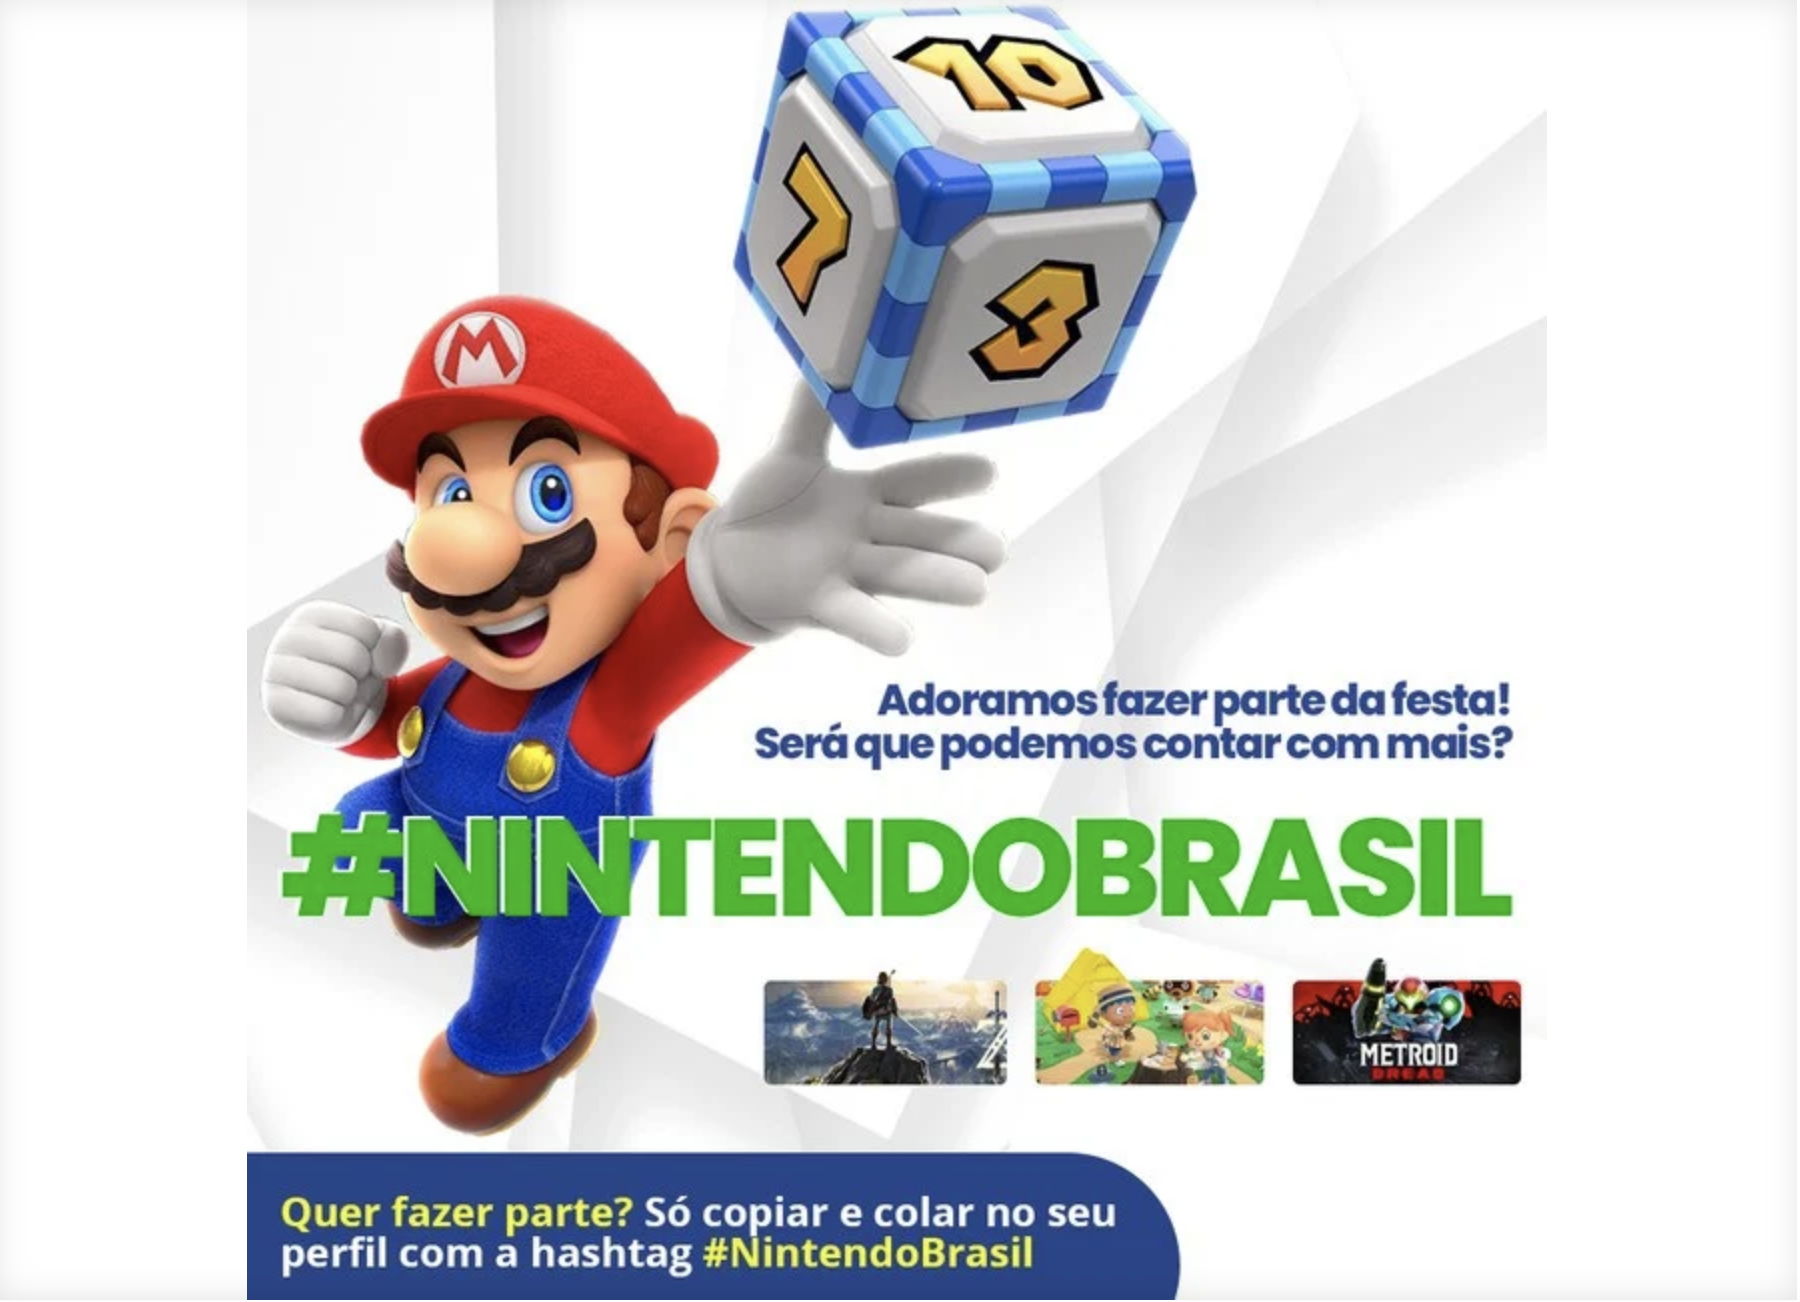 Promotional poster of Nintendo’s first Brazilian localization